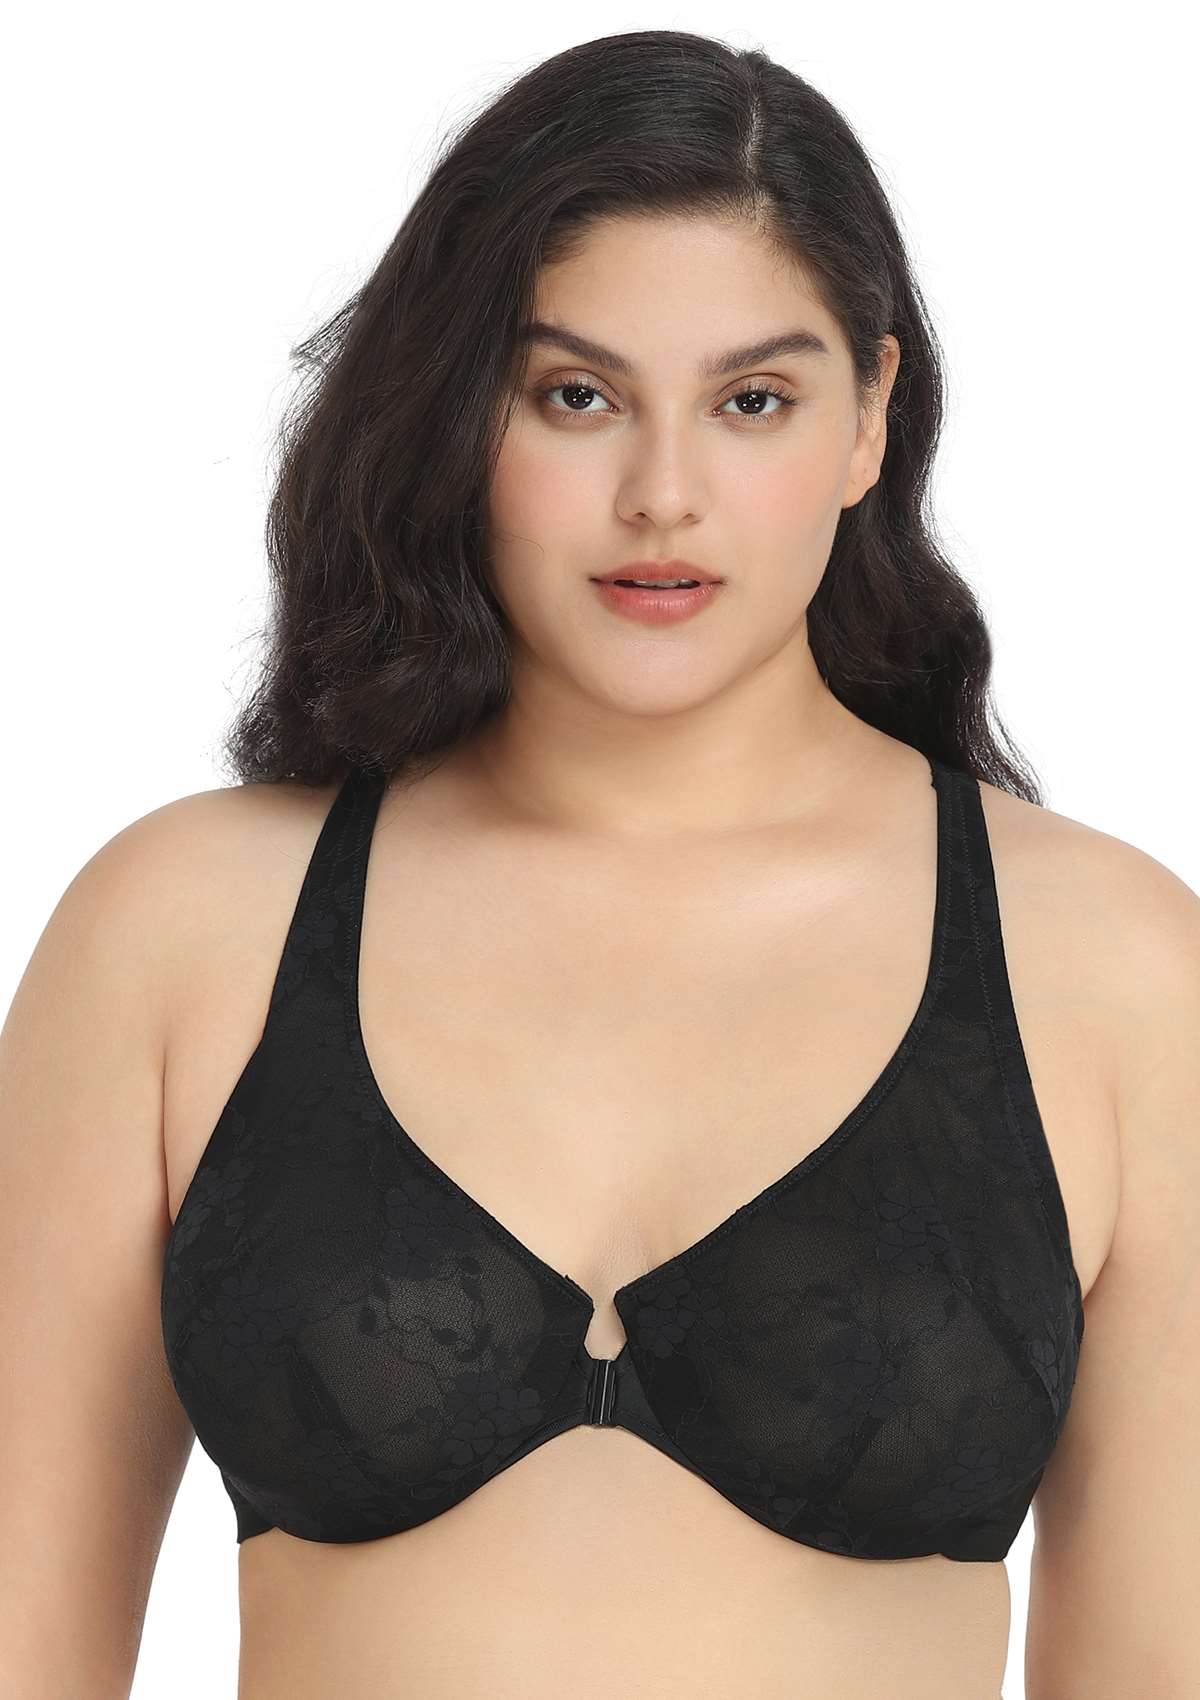 HSIA Spring Romance Front-Close Floral Lace Unlined Full Coverage Bra - Black / 38 / H